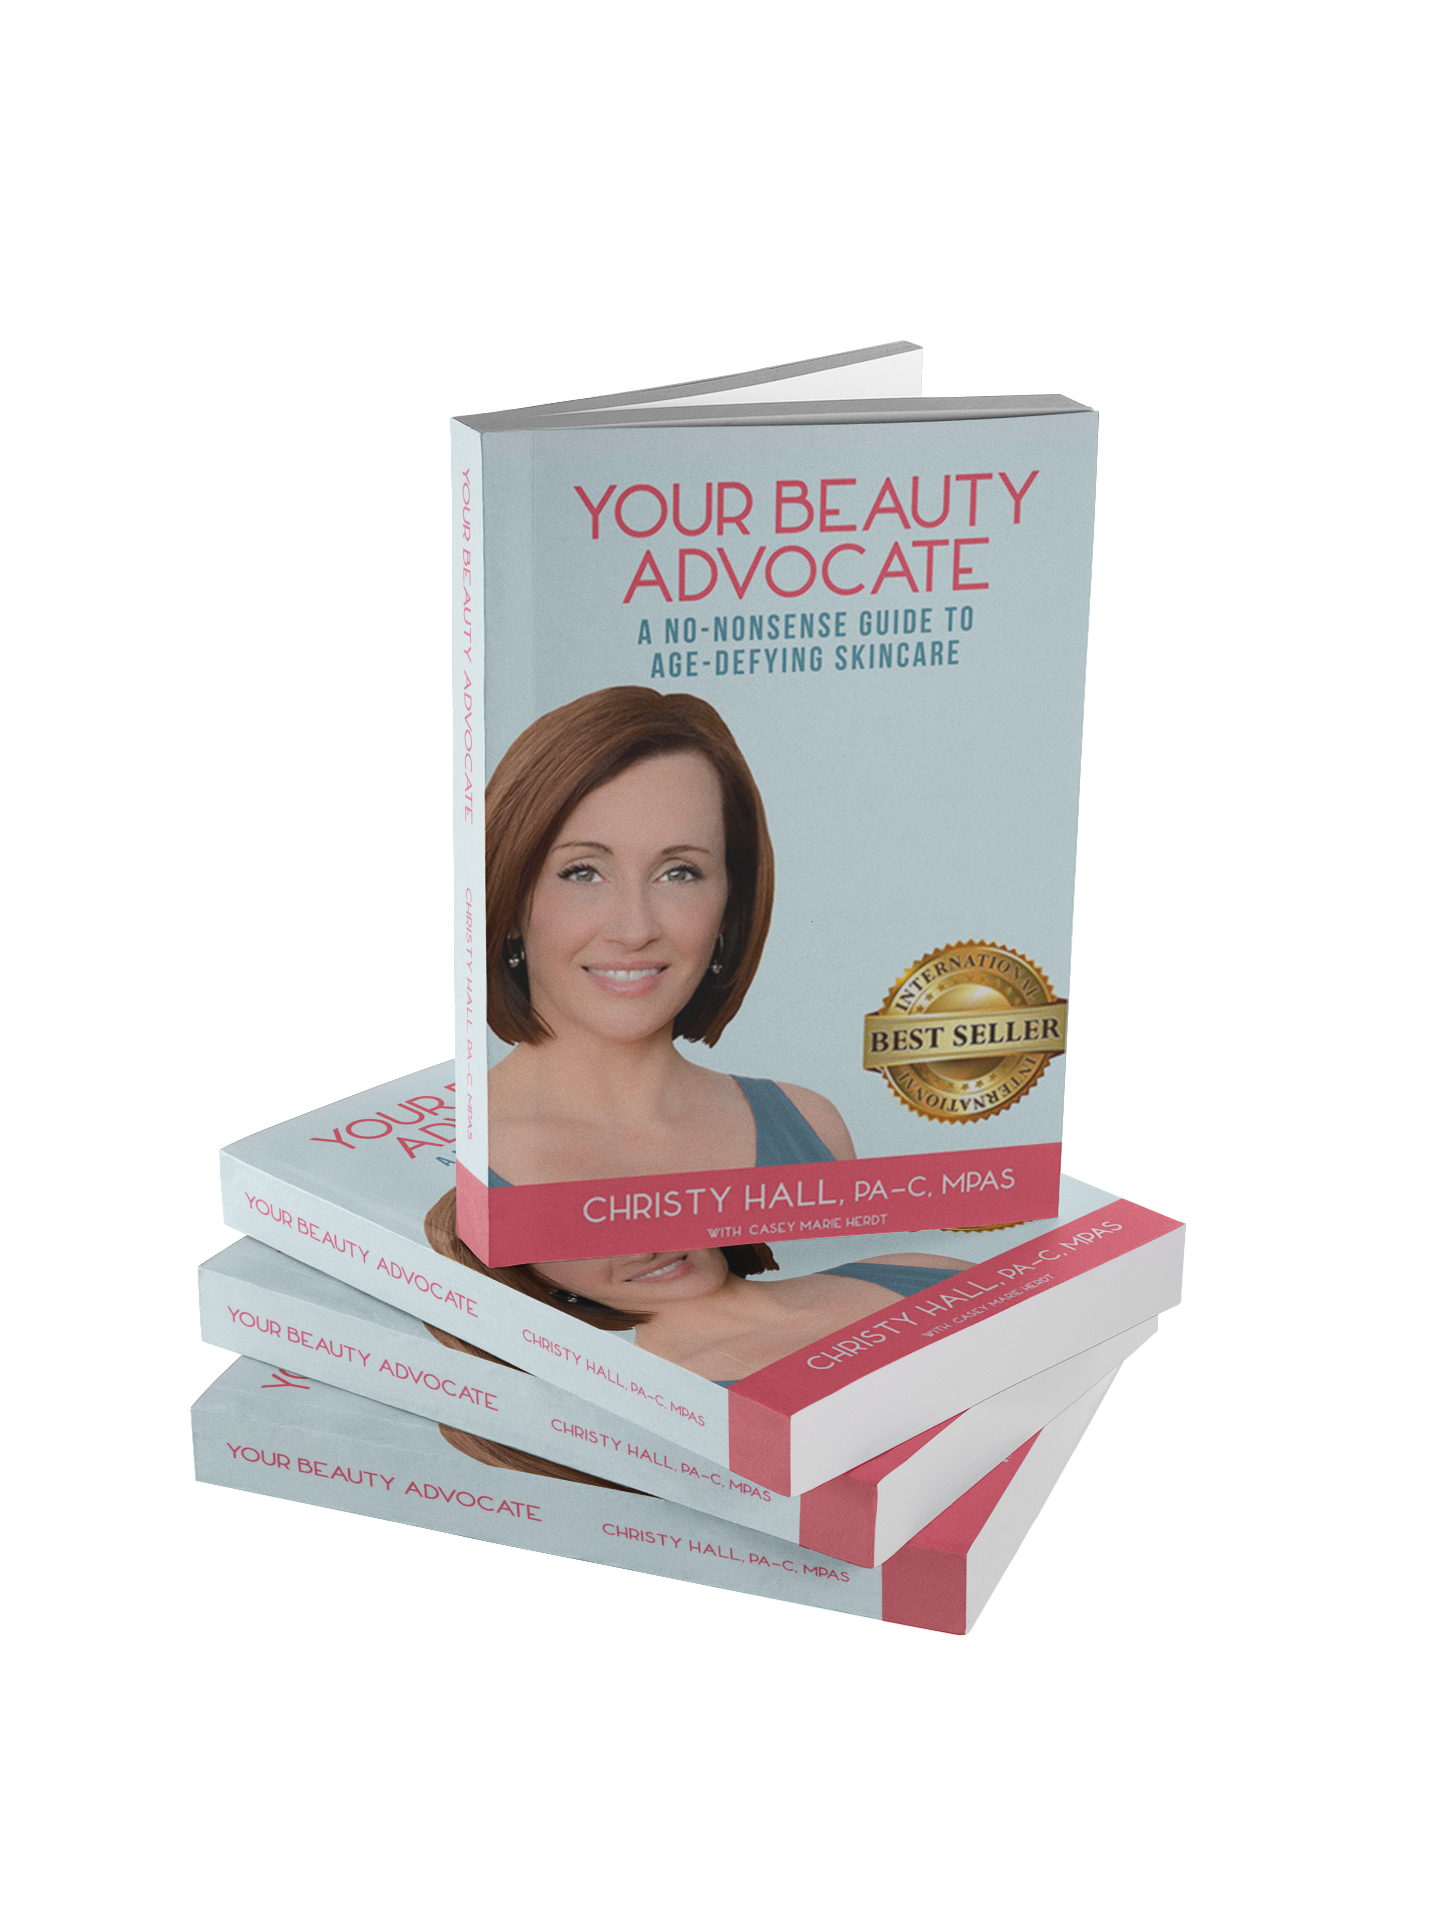 Your Beauty Advocate #1 Best Selling Skincare Book by Christy Hall | Shop Mikel Kristi